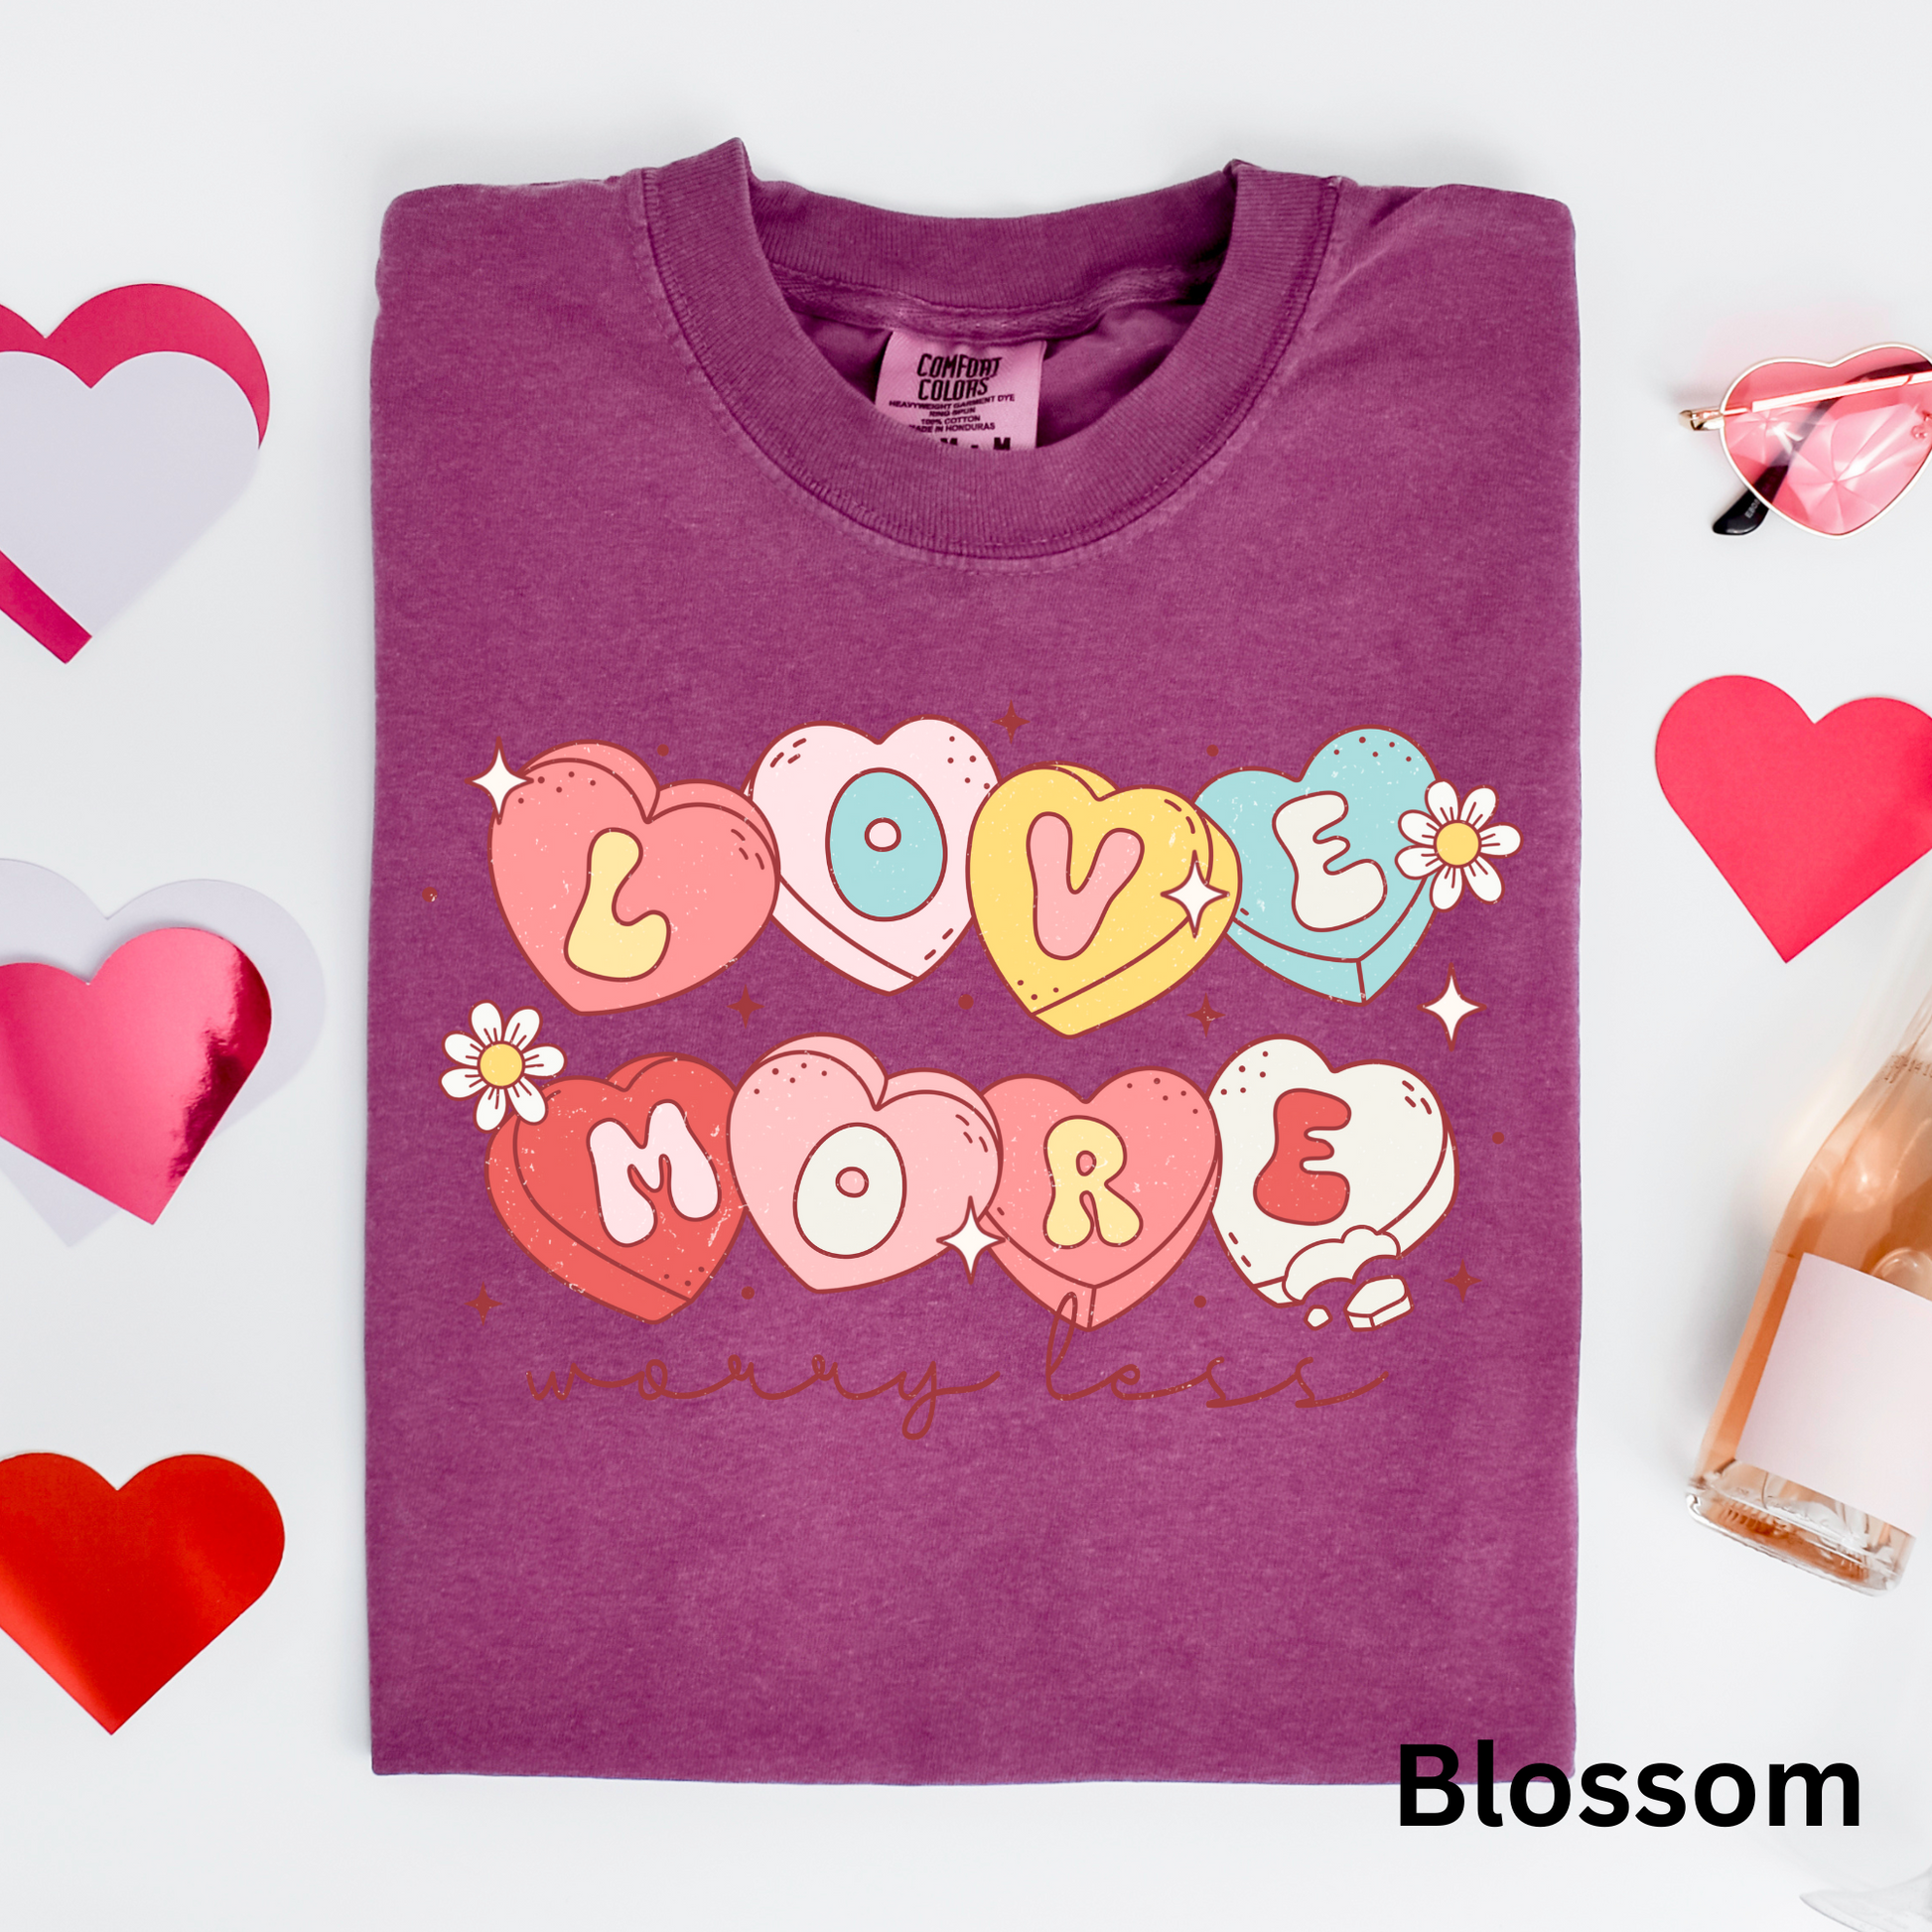 a t - shirt that says love is more than words